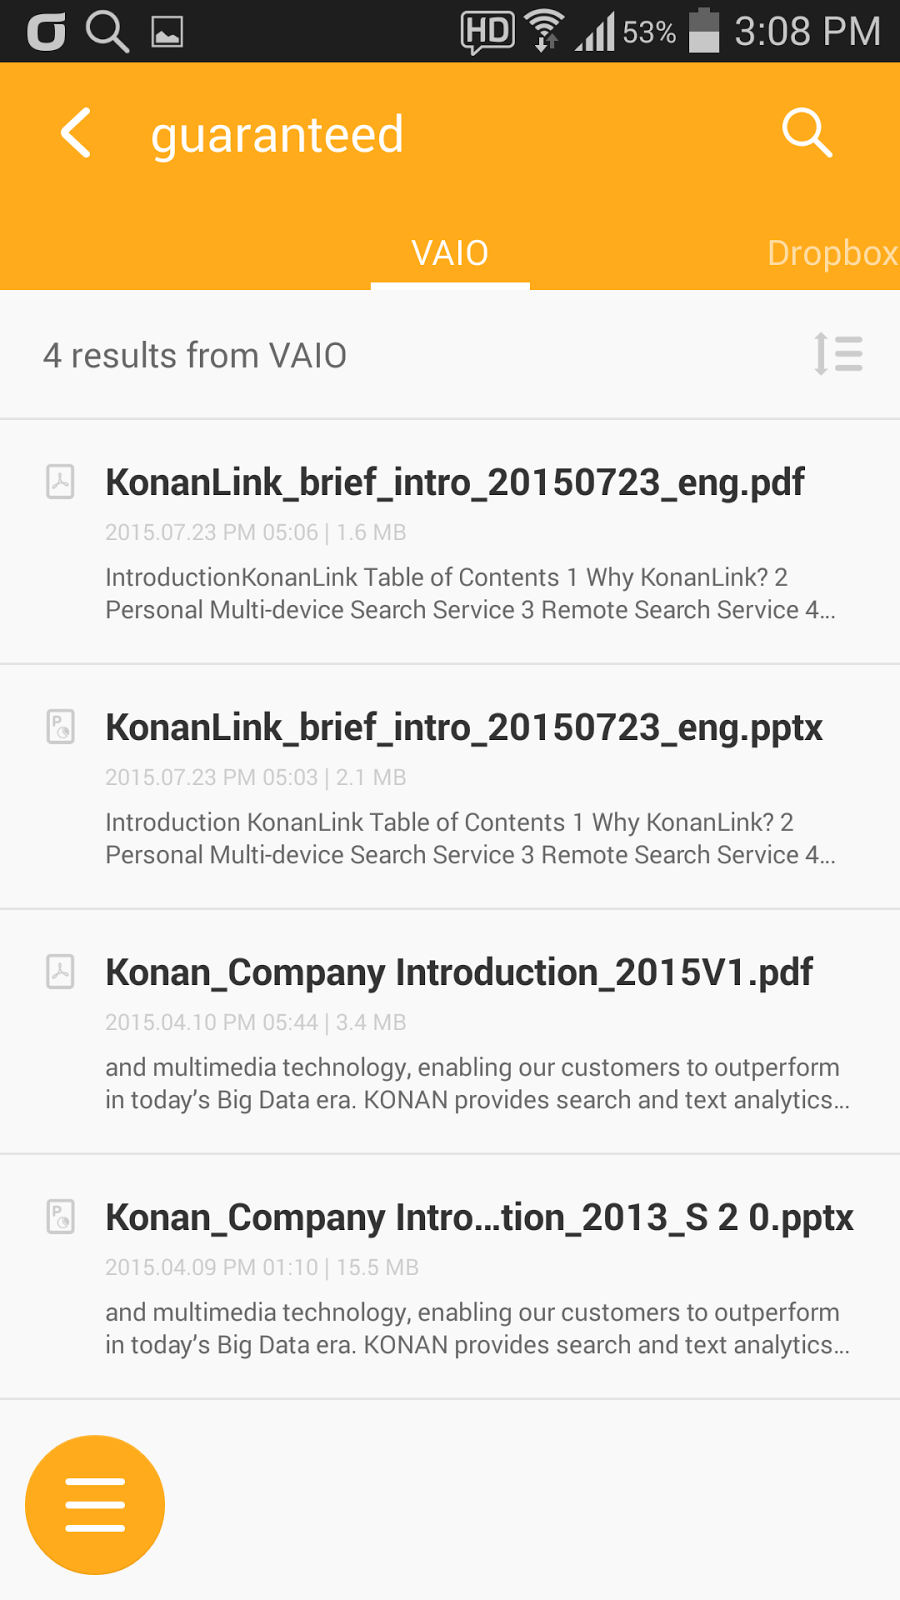 KonanLink: Search PC, smartphone, cloud, email at once 